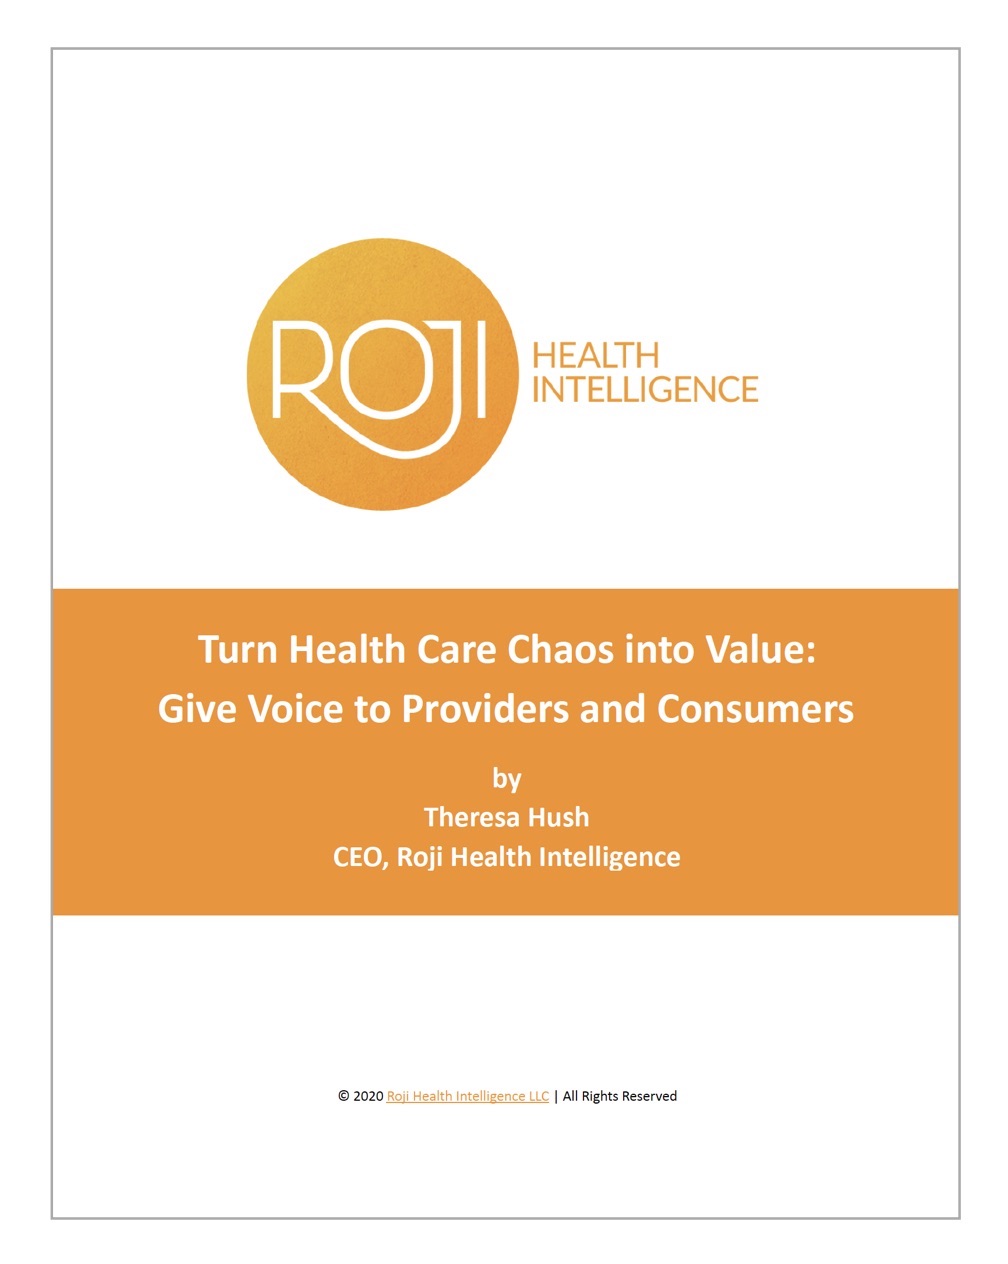 Get the eBook: Turn Health Care Chaos into Value – Give Voice to Providers and Consumers